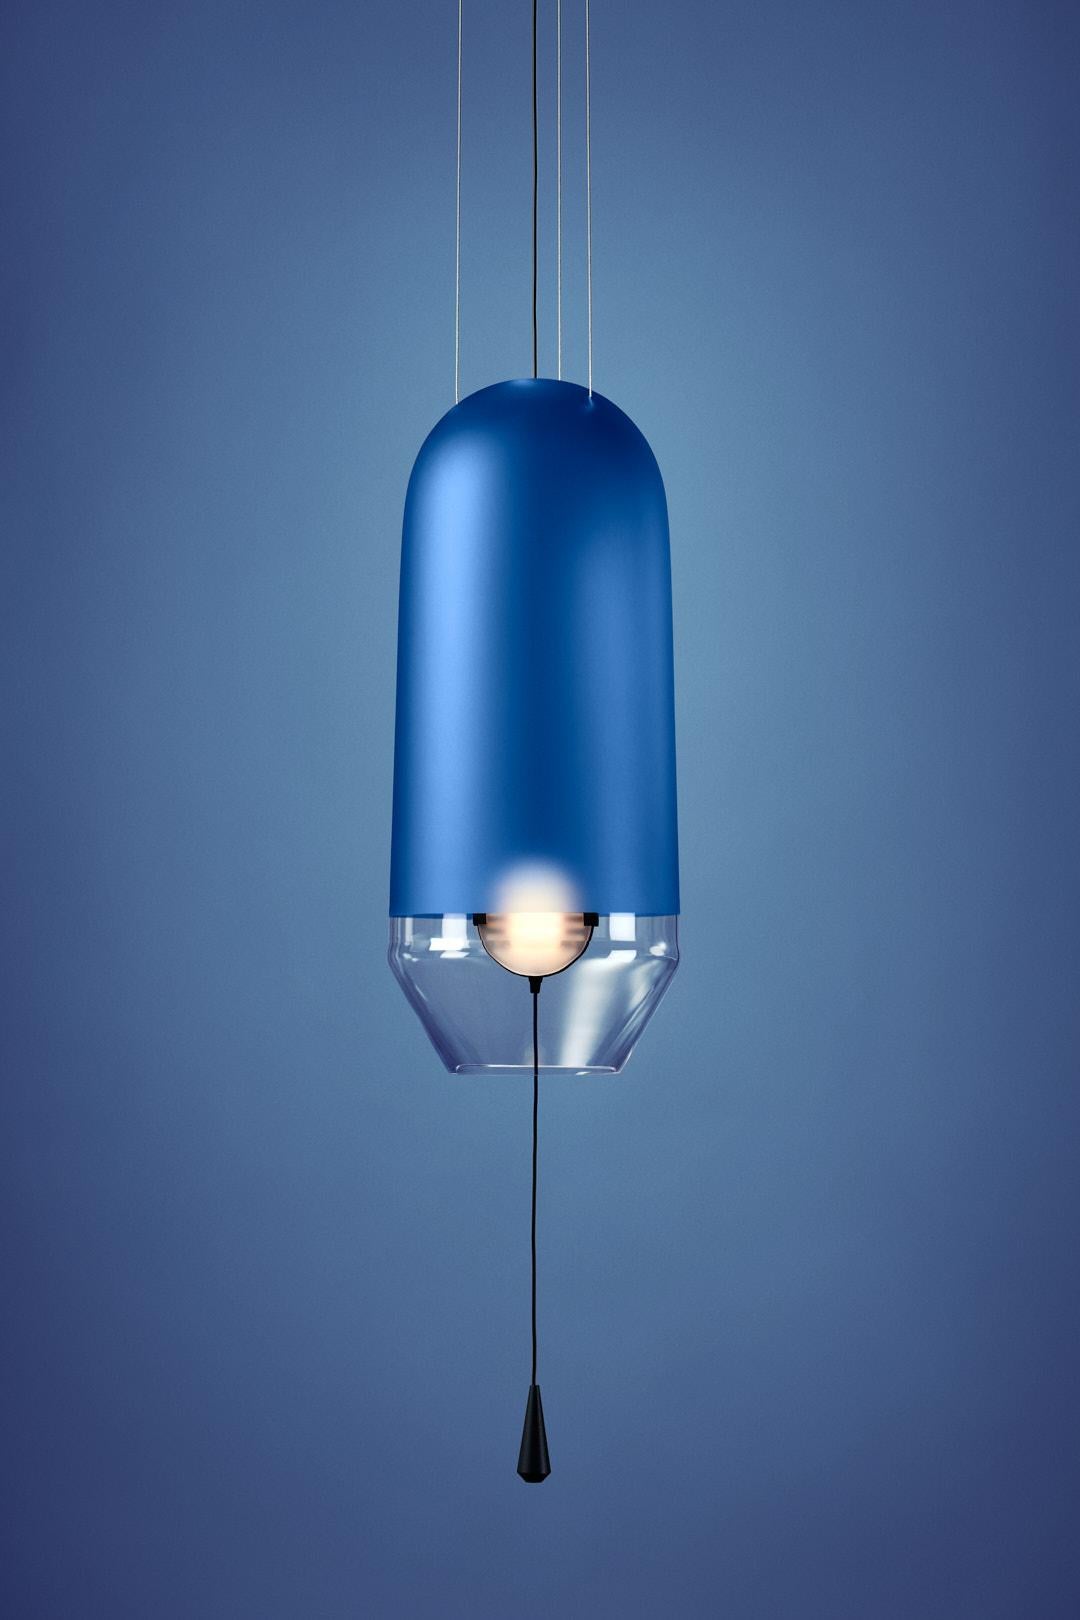 “Limpid Light” is a pendant light, decorative light made in Europe.
This collection comes with color customization. We are able to develop specific colors that fit your interior in different shades. For example, you can have a set of 4 Limpid light